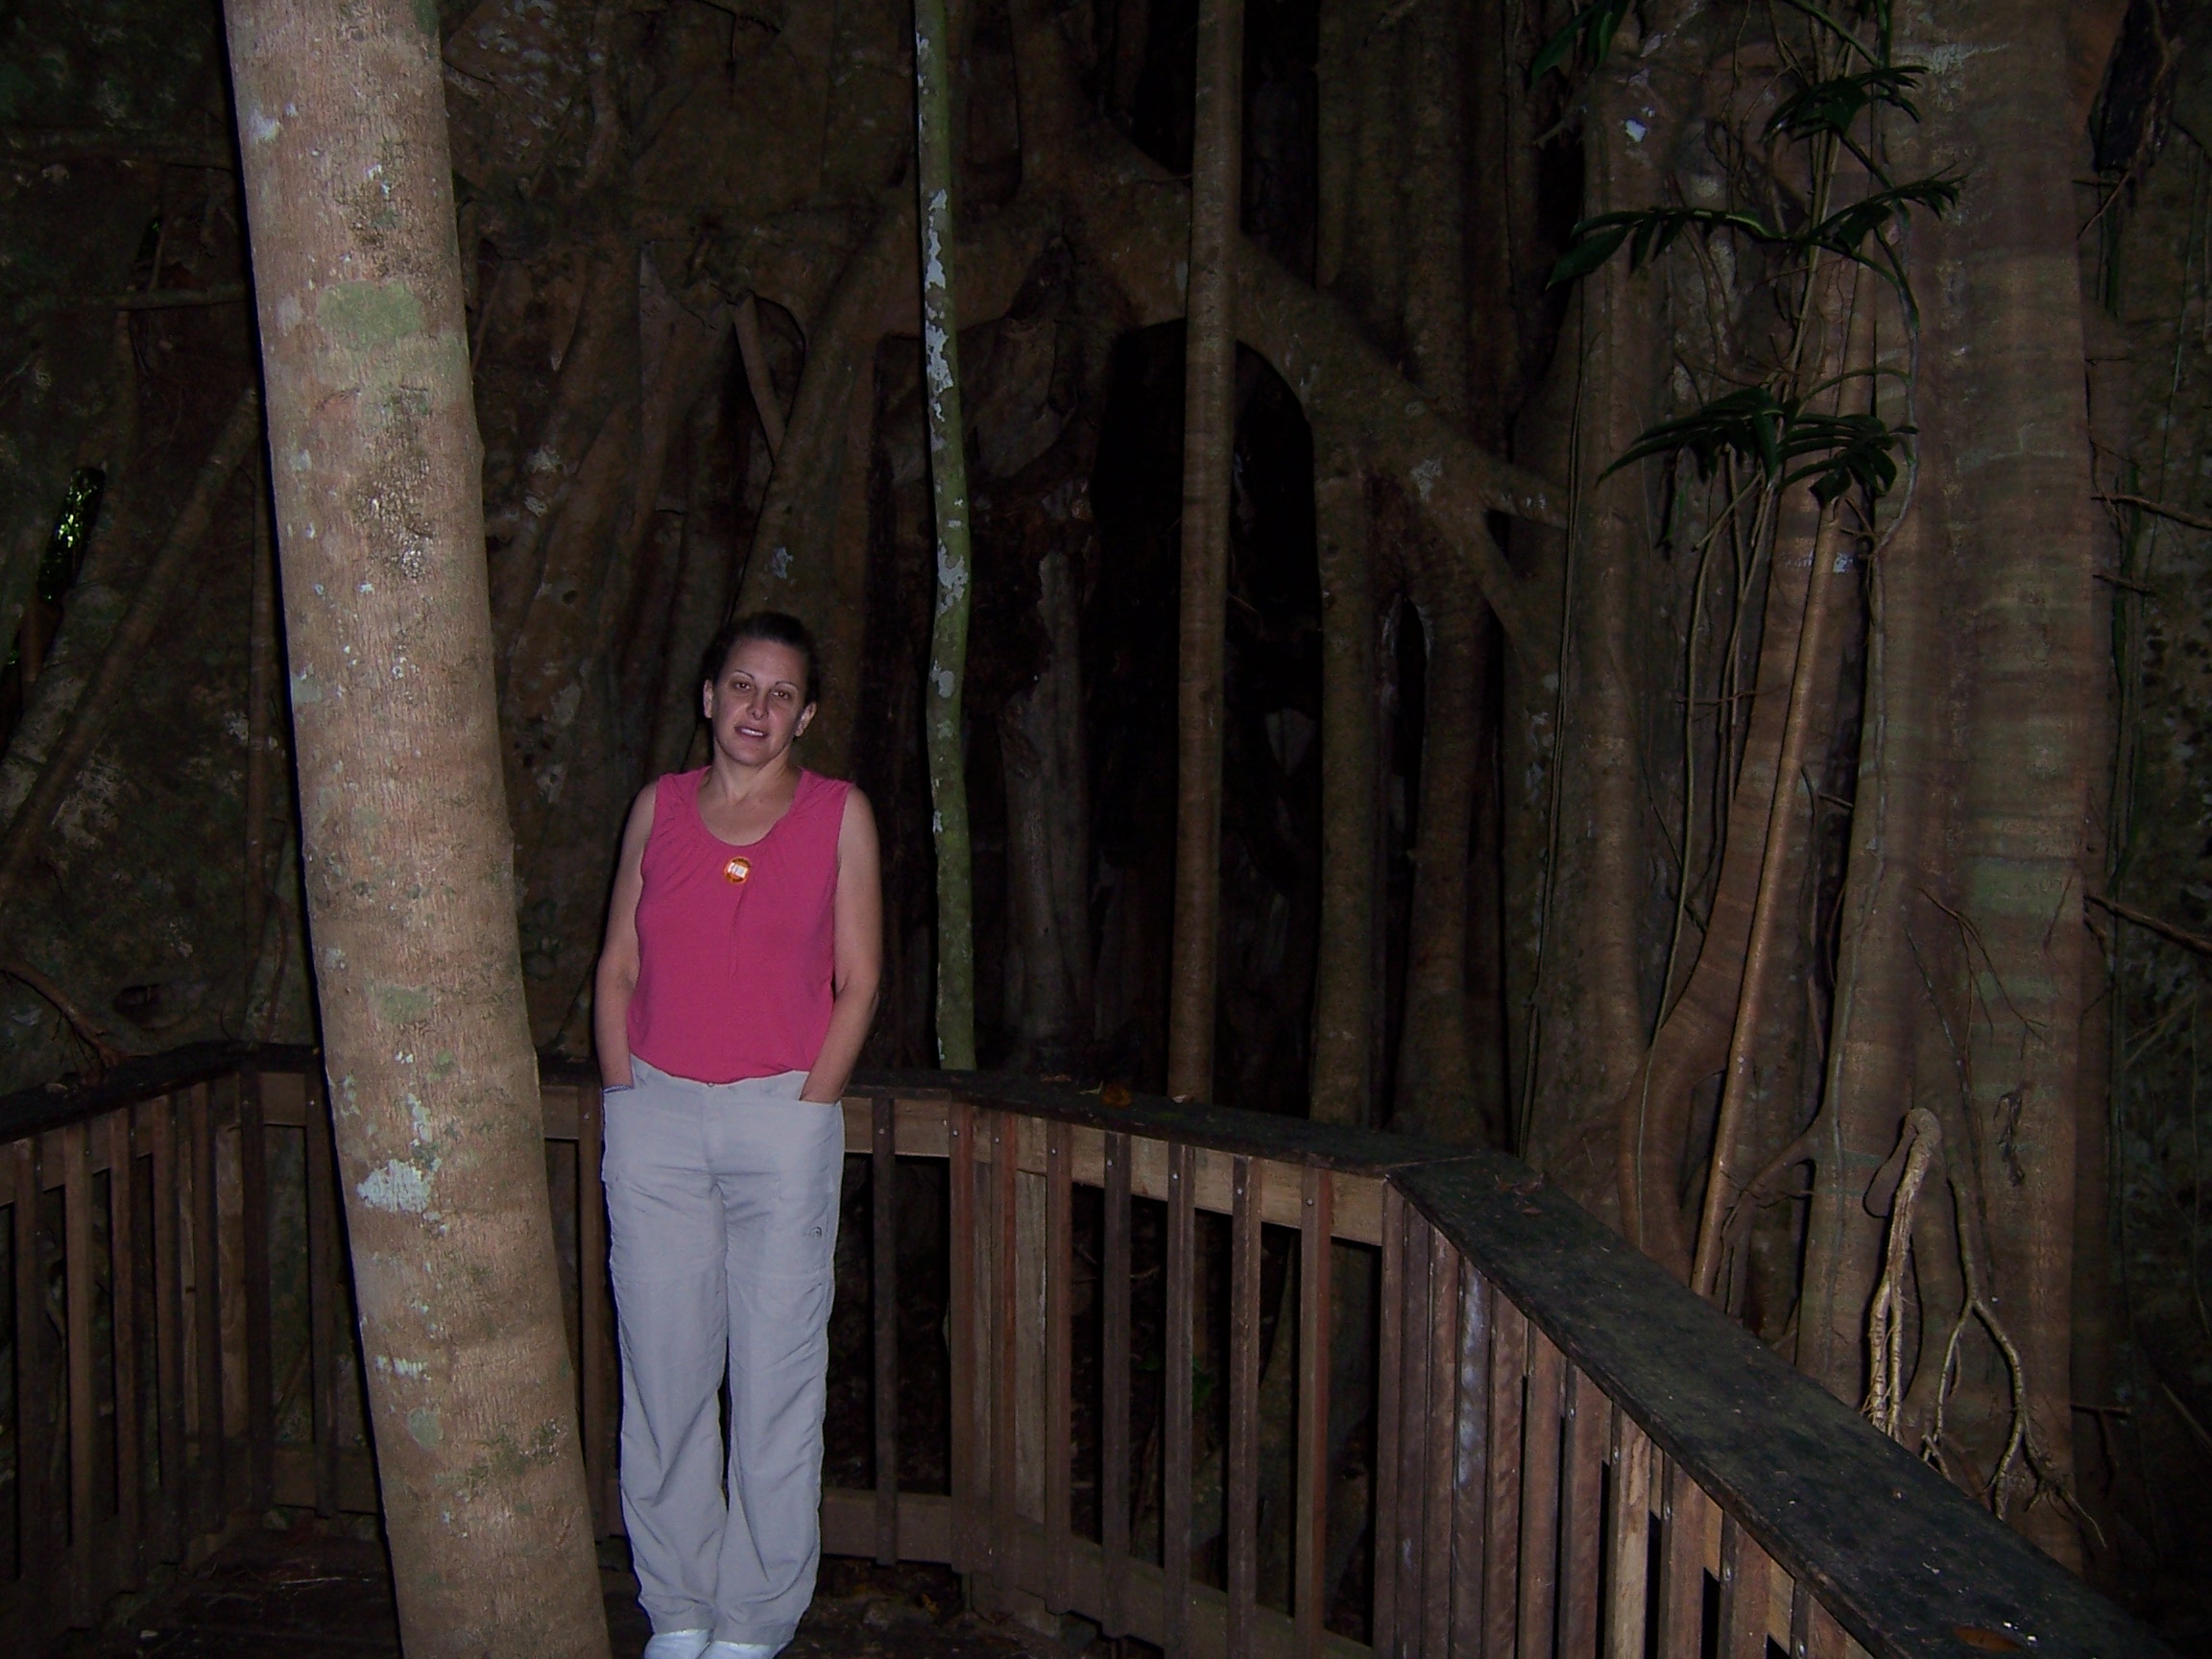 Gigant tree in the rain forest